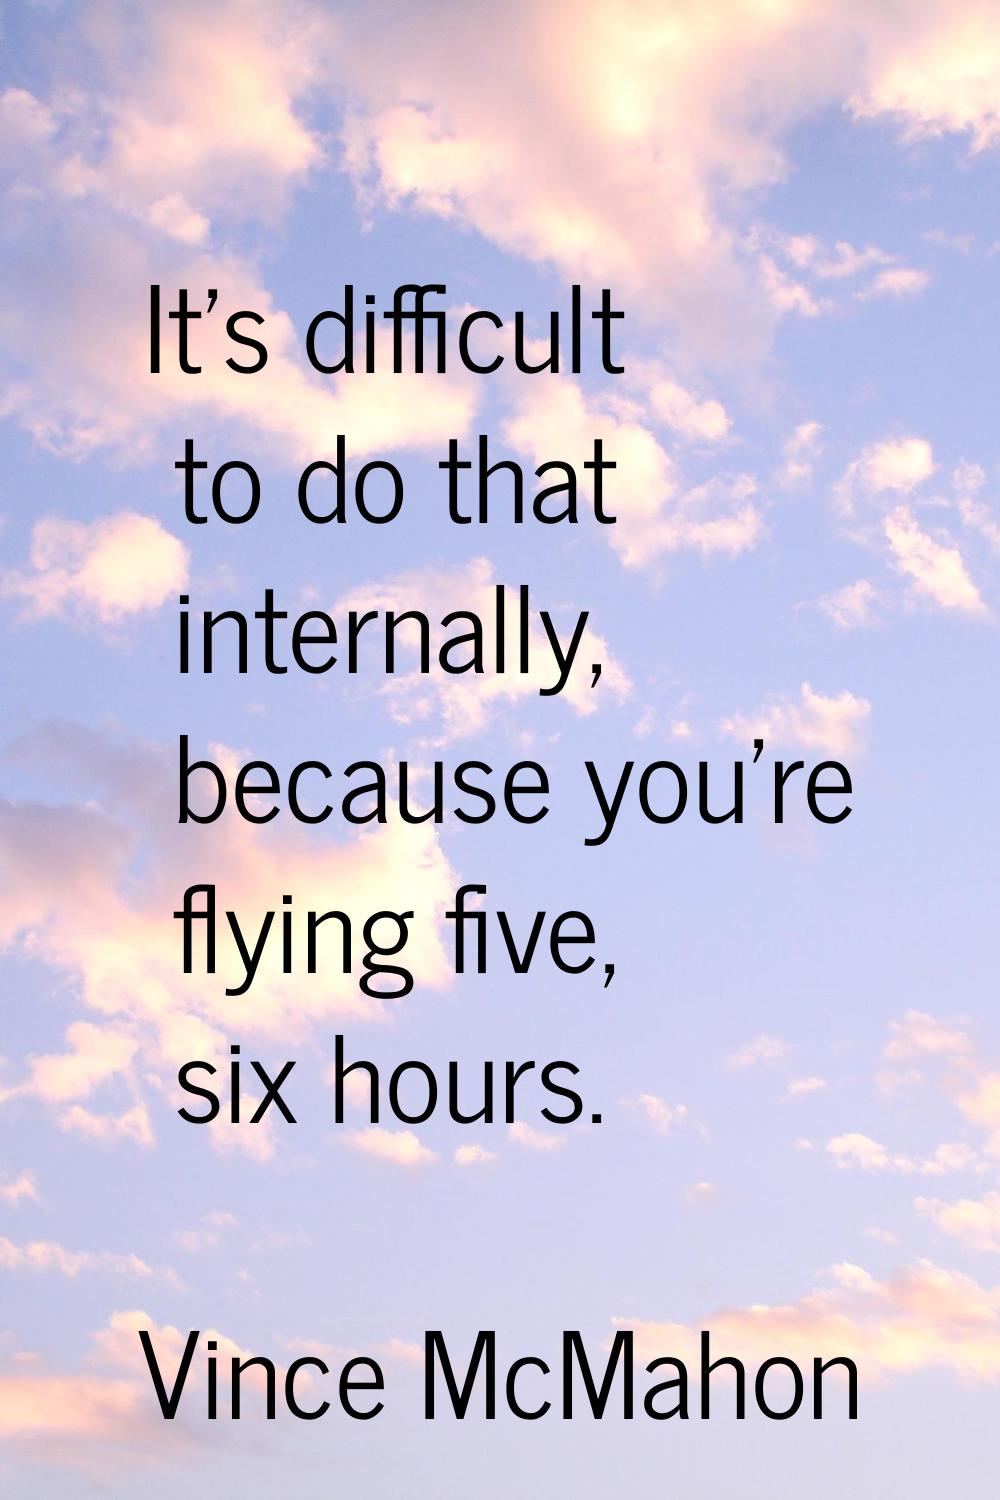 It's difficult to do that internally, because you're flying five, six hours.